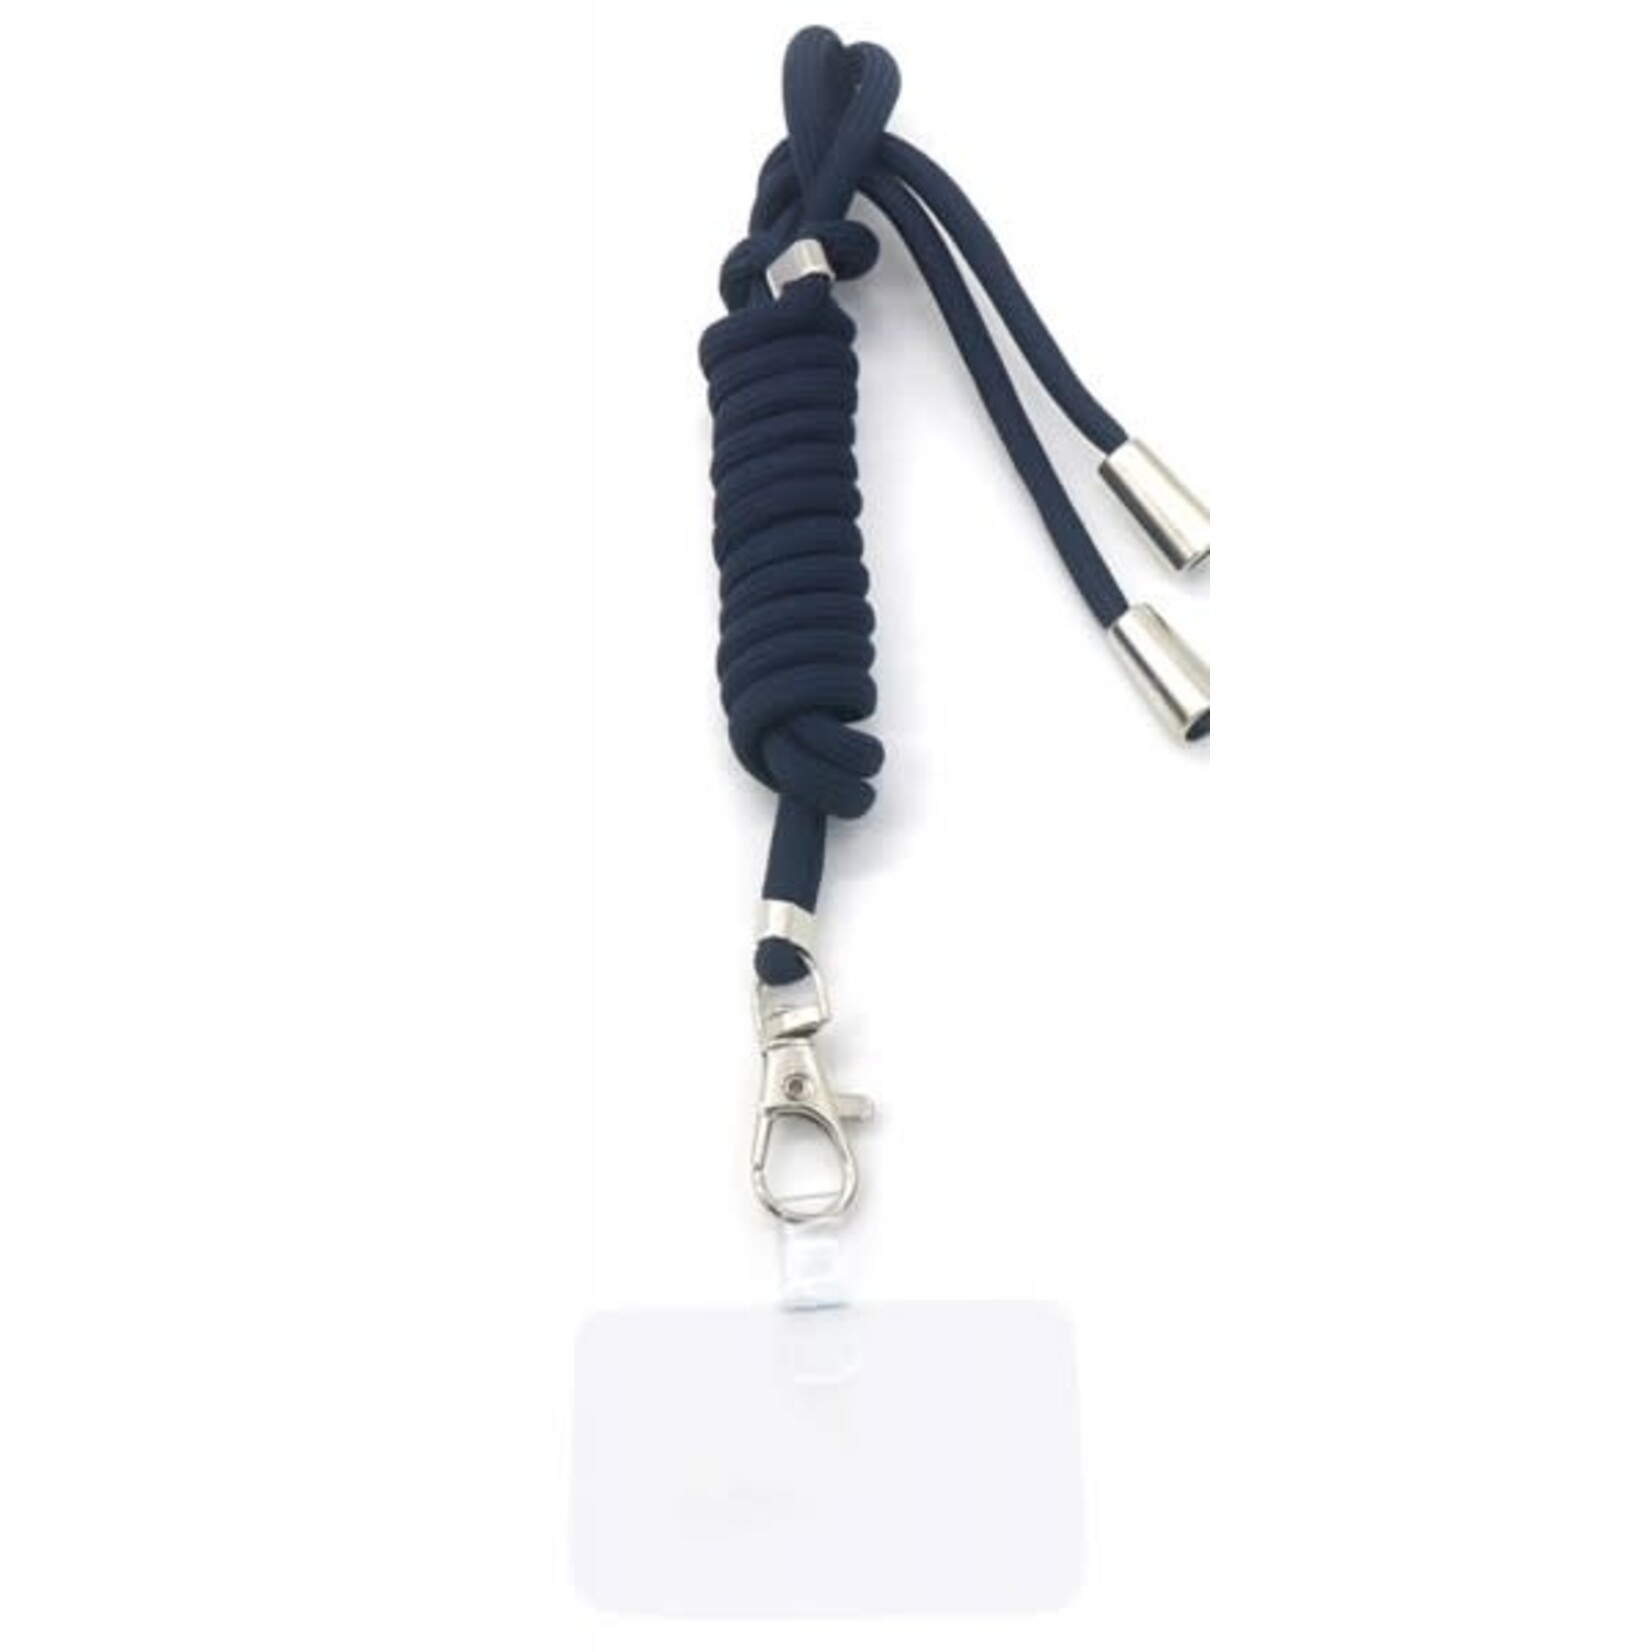 More the Firm Phone strap